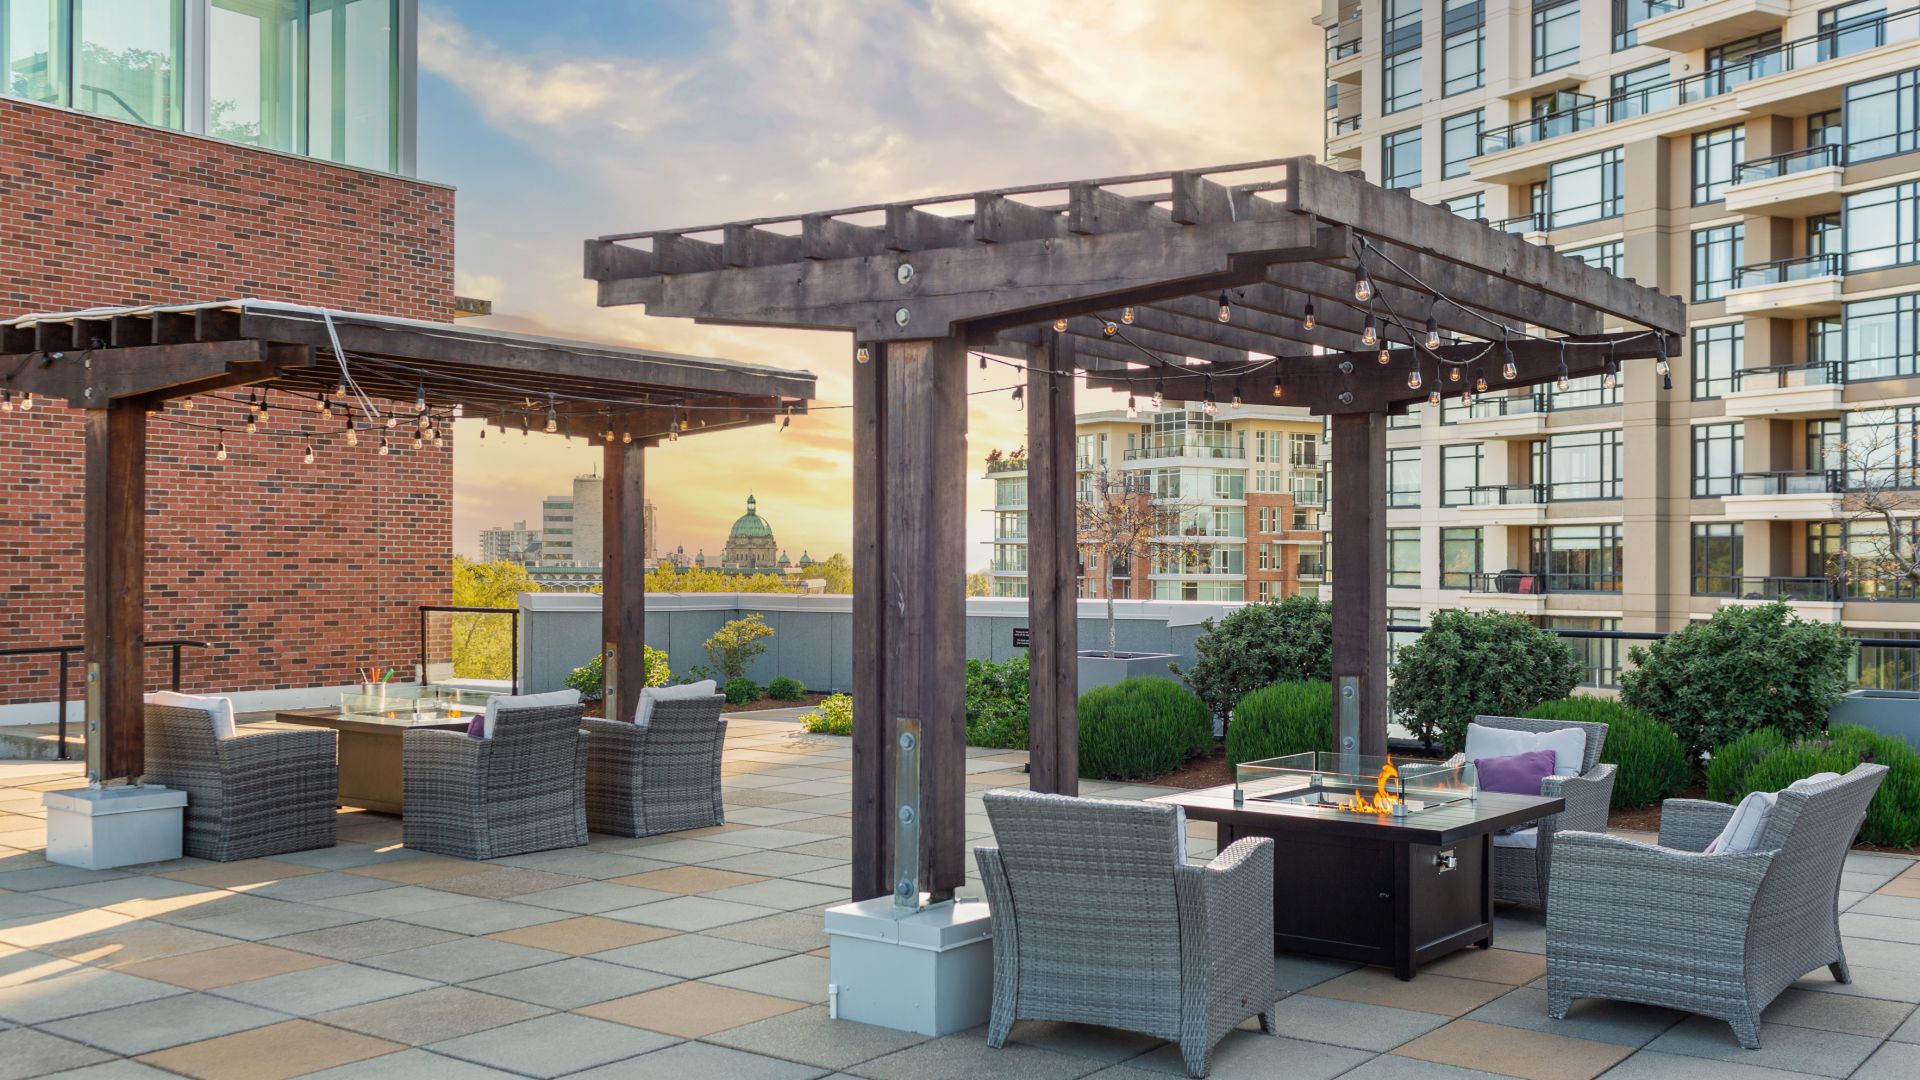 Outdoor rooftop seating at The Parkside Hotel & Spa with multiple chairs, tables with fire pits, and wooden overhangs